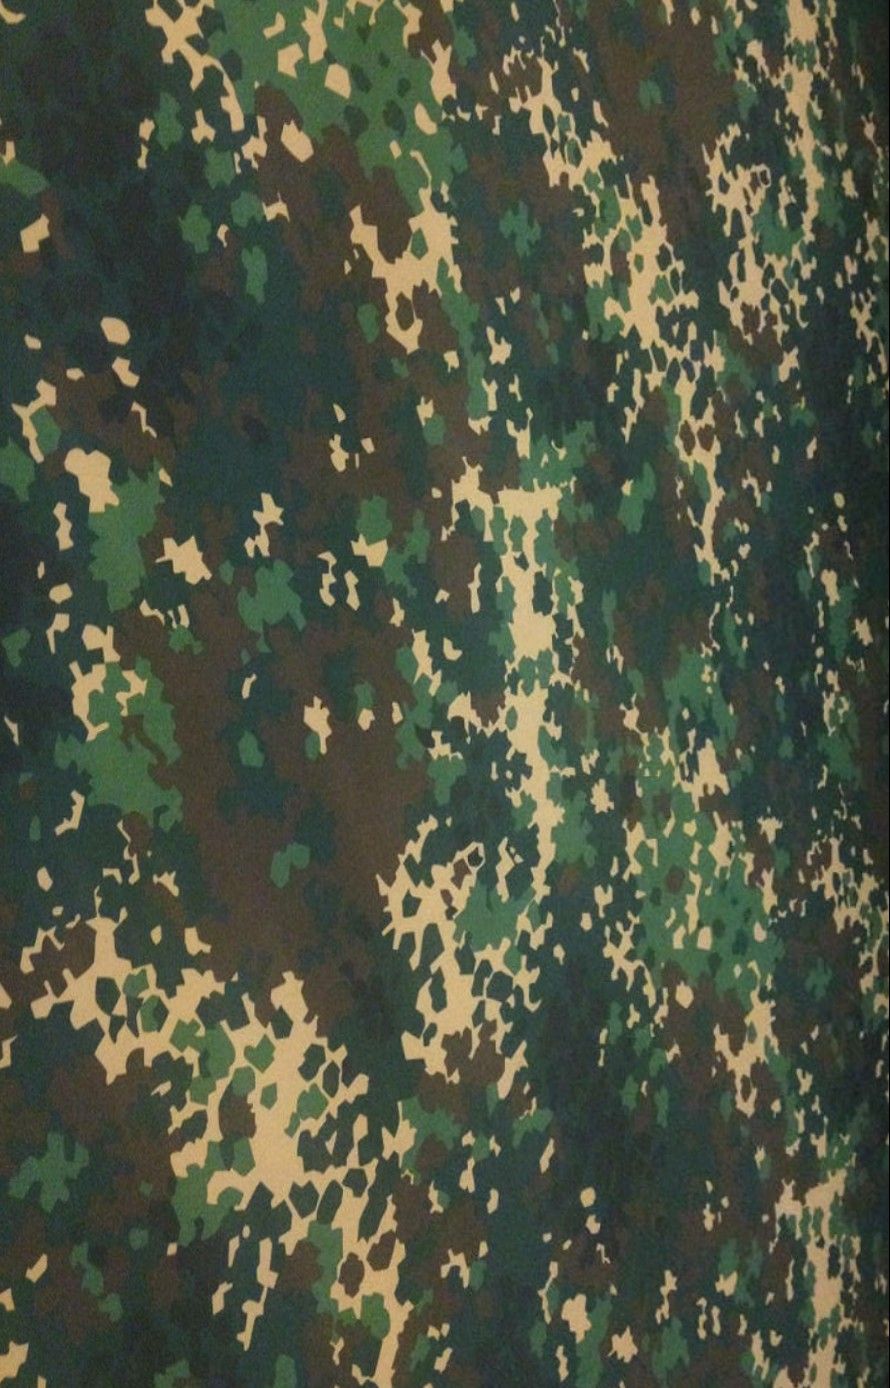 Ojkre On Military Design Camo Gear Camouflage Patterns